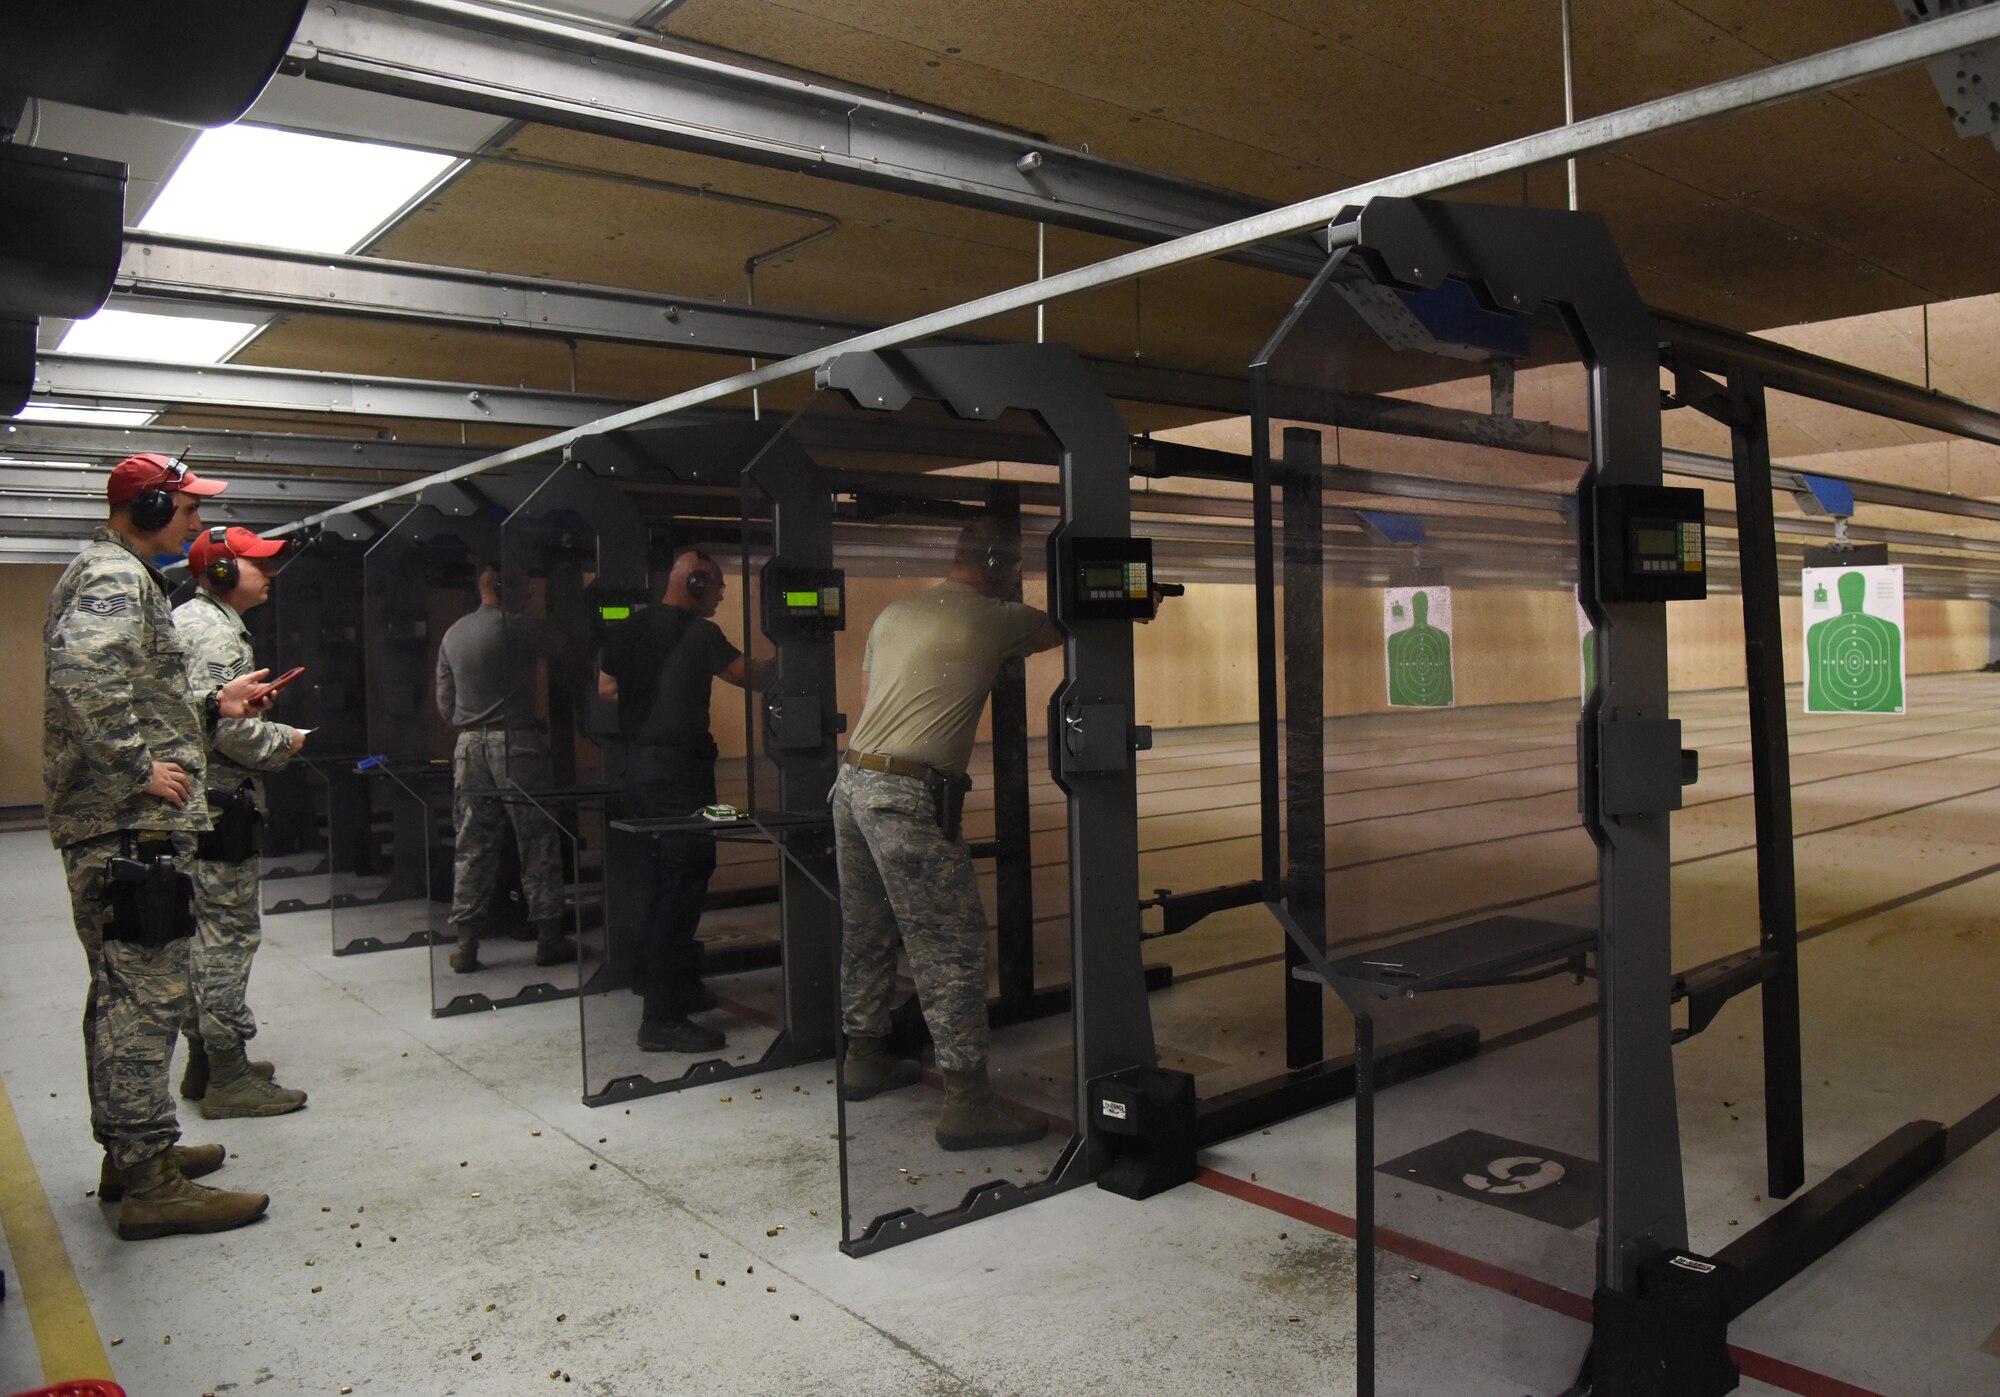 Members of the 81st Security Forces Squadron host the 81st SFS law enforcement team competition shoot in the indoor firing range May 17, 2017, on Keesler Air Force Base, Miss. The event was held during National Police Week, which recognizes the service of law enforcement men and women who put their lives at risk every day. (U.S. Air Force photo by Kemberly Groue)